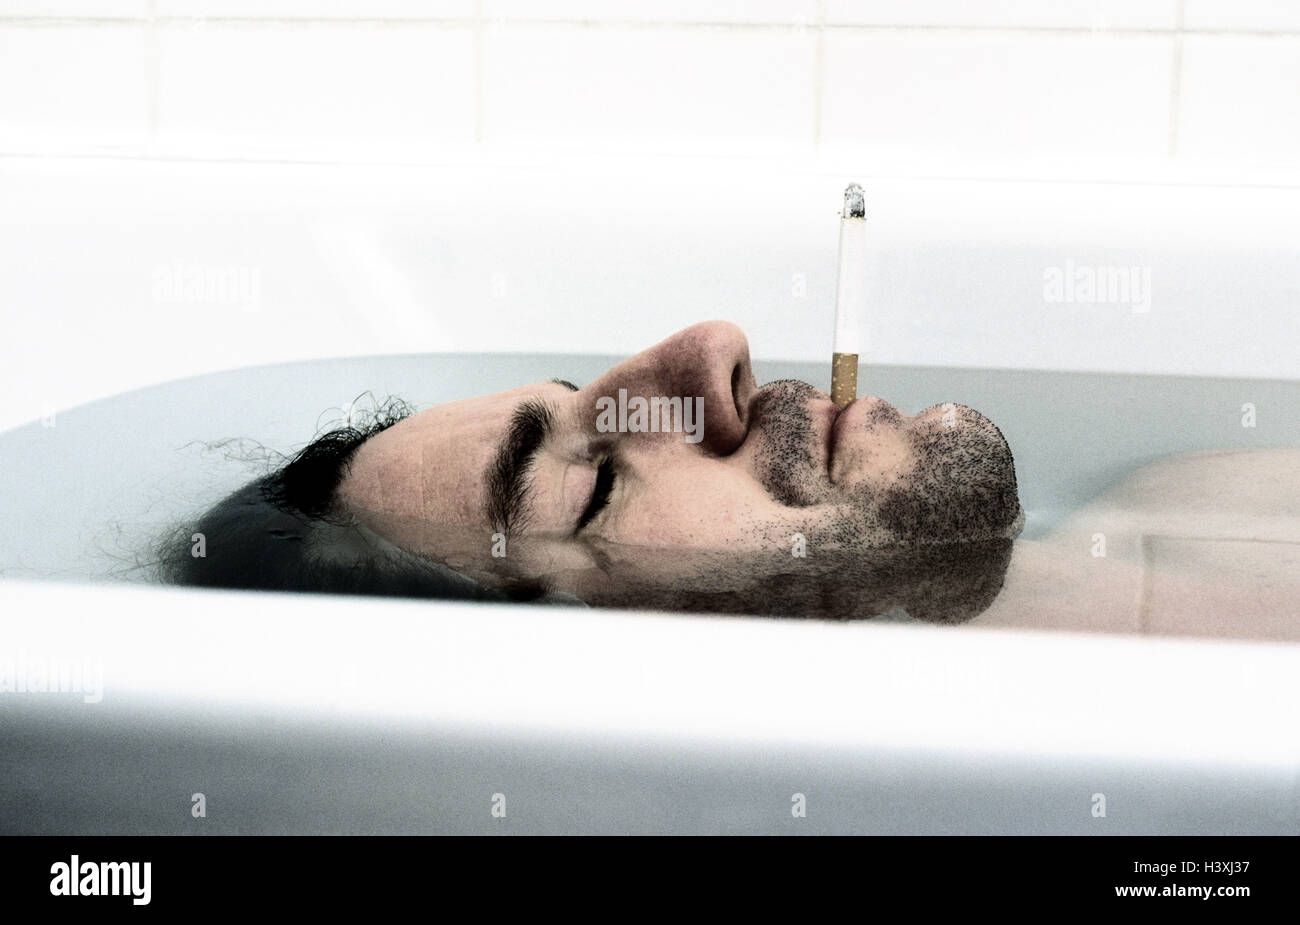 Man, bath, cigarette, relaxing, take it easy, tread, bath, have of a bath, hygiene, personal care, consumption, enjoy, pleasant sensation, well-being, ease, recreation, rest, switch off, water, dives, go down, smoke, smokers, dark-haired, unshaven, eyes closed, beard, side view, page portrait, 'can be done', lifestyle, detail, inside, very close, soul massage Stock Photo